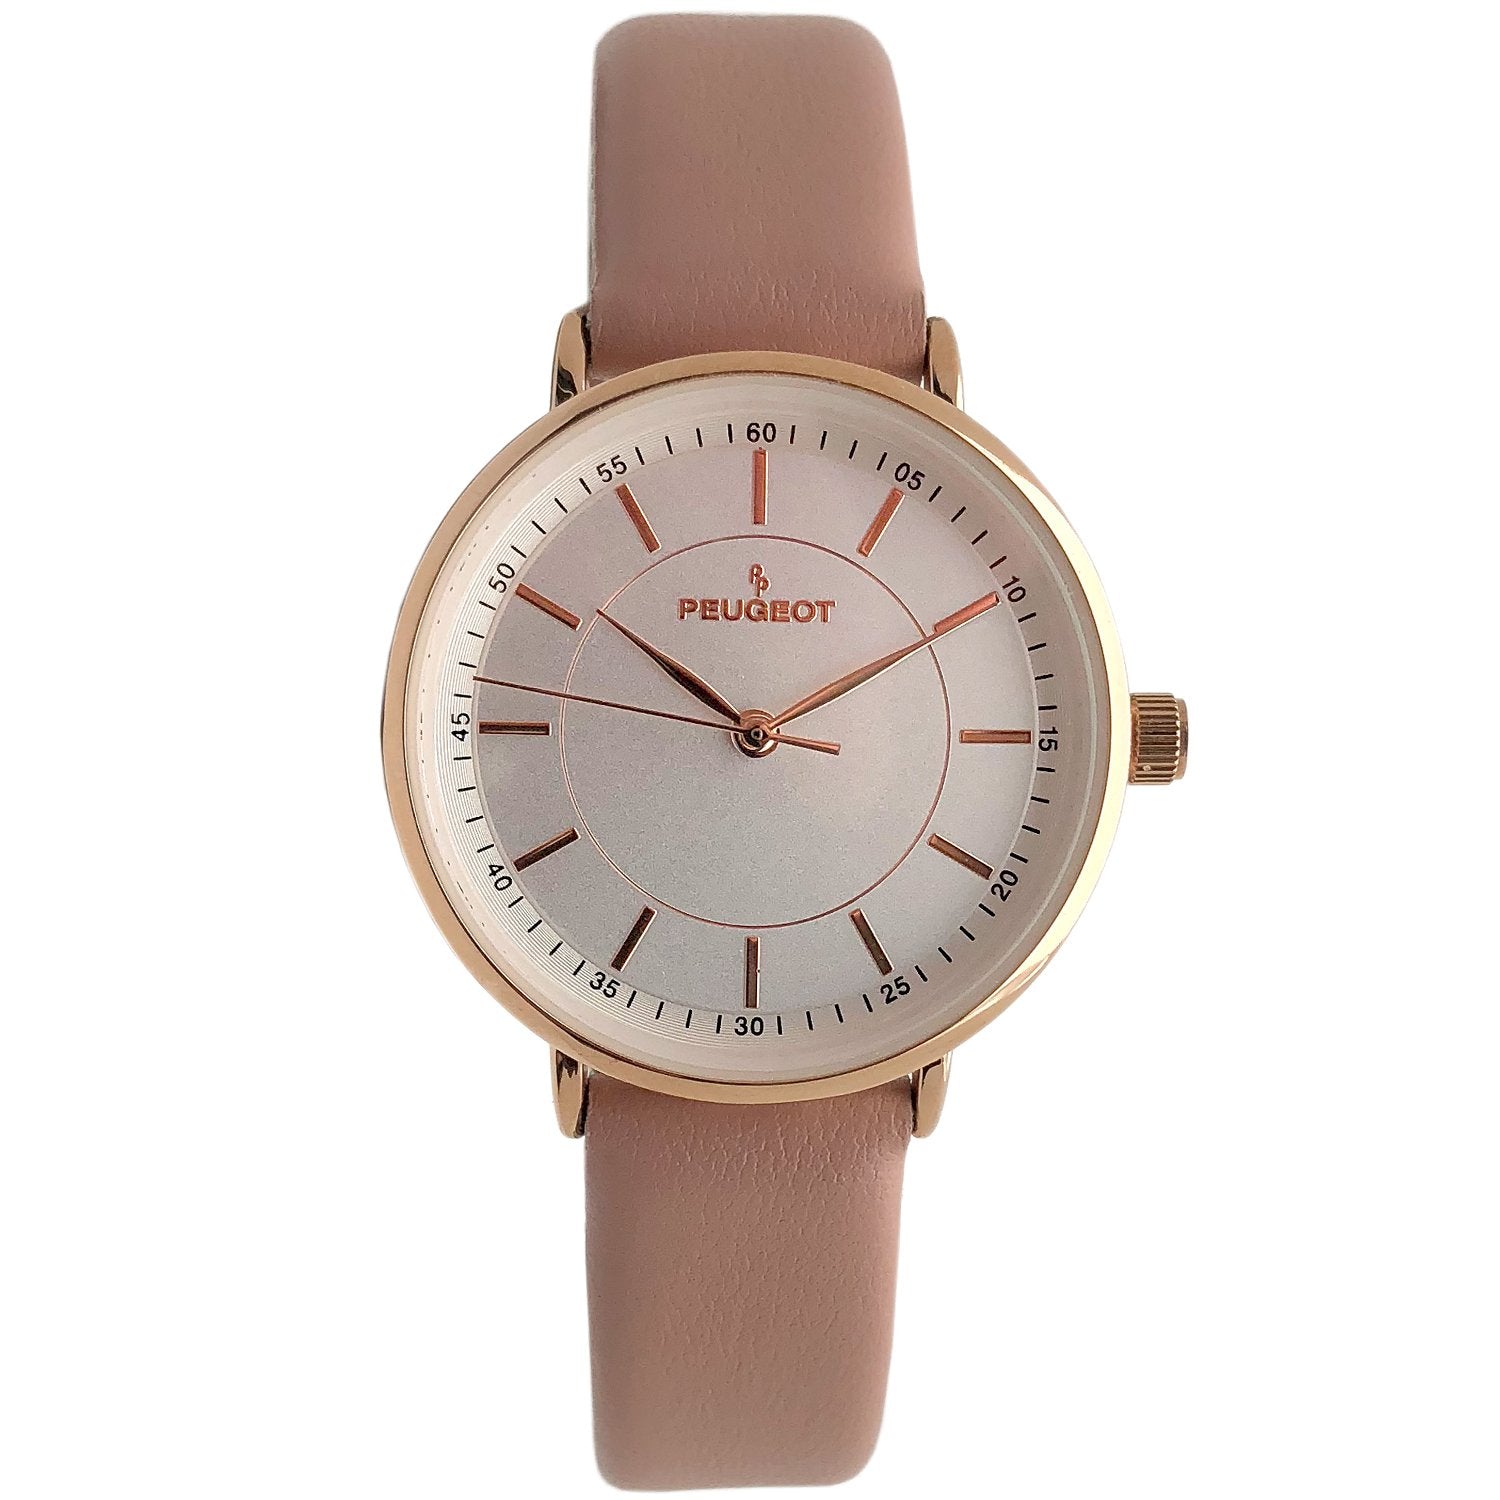 Peugeot Women's Watch Gold Round Large Gold Face Brown Leather Strap -  Peugeot Watches